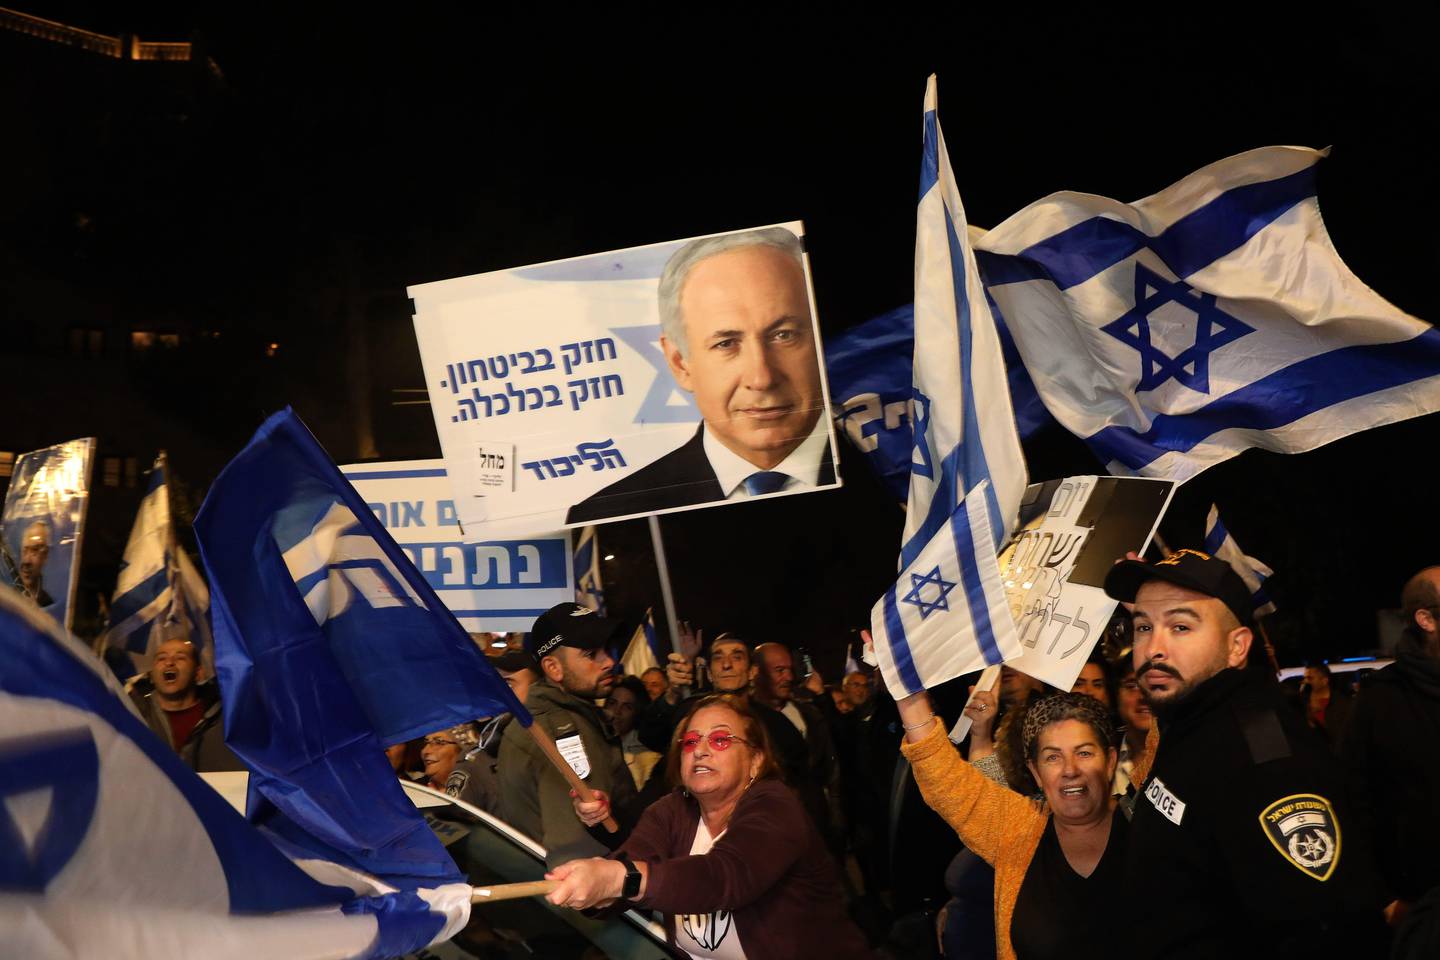 Supporters of Israeli Prime Minister Benjamin Netanyahu wave flags and placards as they rally to express their solidarity, outside his Jerusalem office on November 23, 2019. - Benjamin Netanyahu's indictment on corruption charges a day earlier prompted speculation that the end of his decade-long tenure was nigh, though several key allies expressed support for the beleaguered Israeli premier. (Photo by GALI TIBBON / AFP)